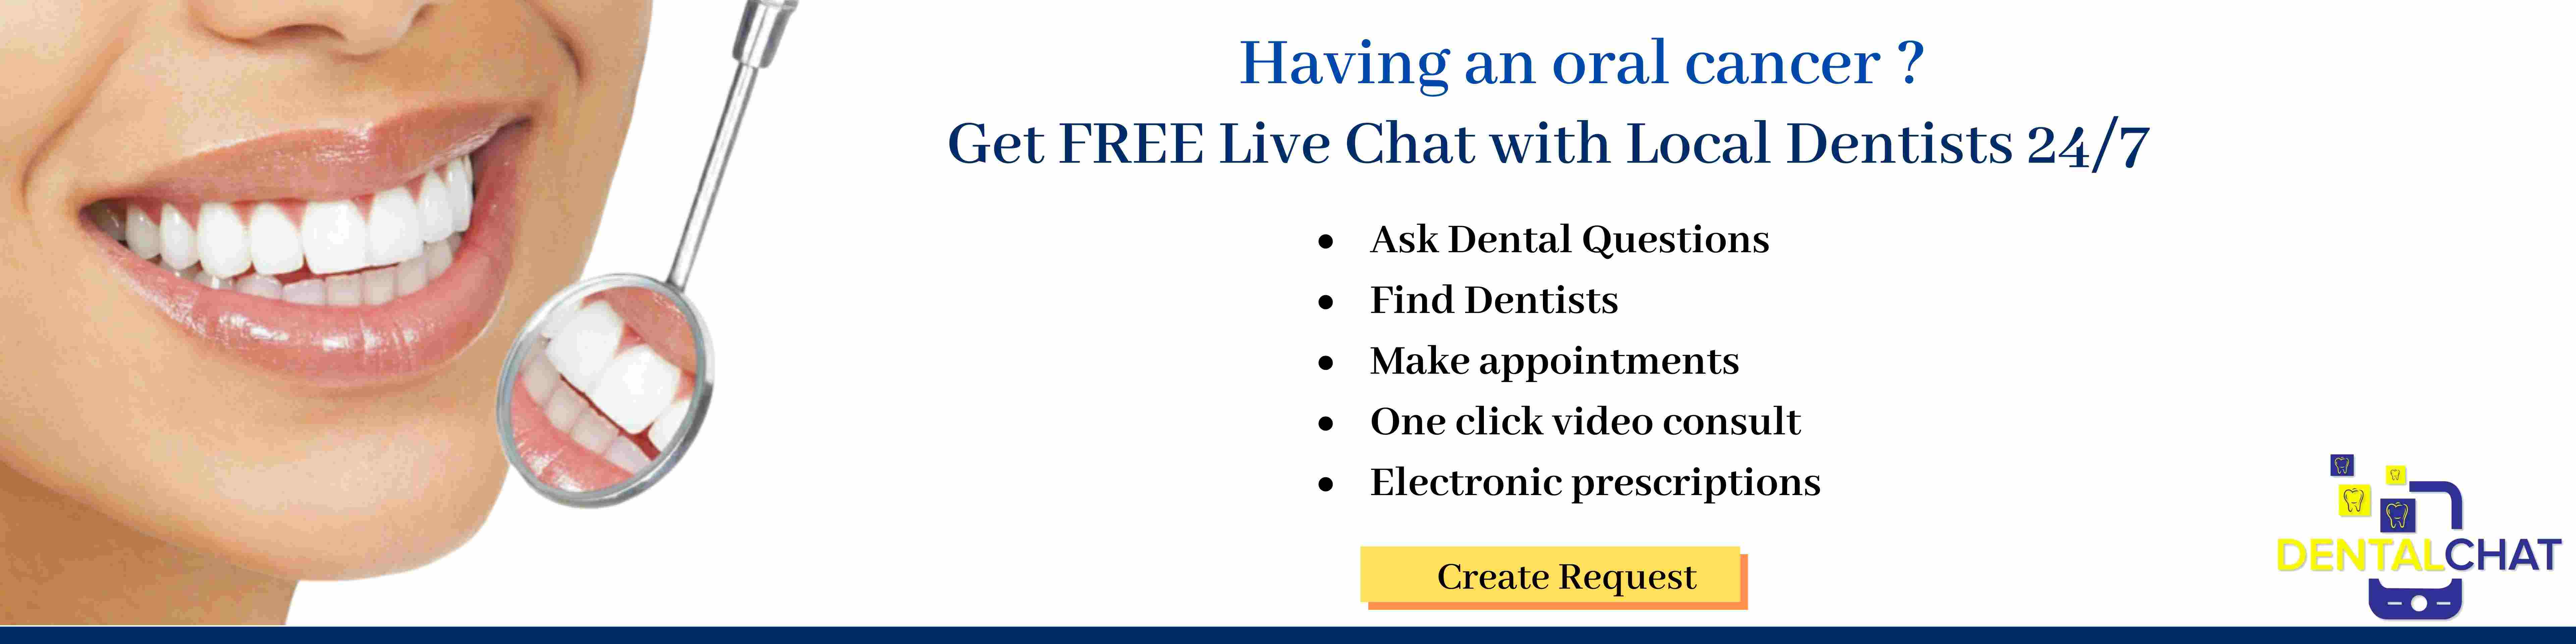 Oral lesion question chat, local teledentistry oral cancer consult and teledental oral lesions questions consultation